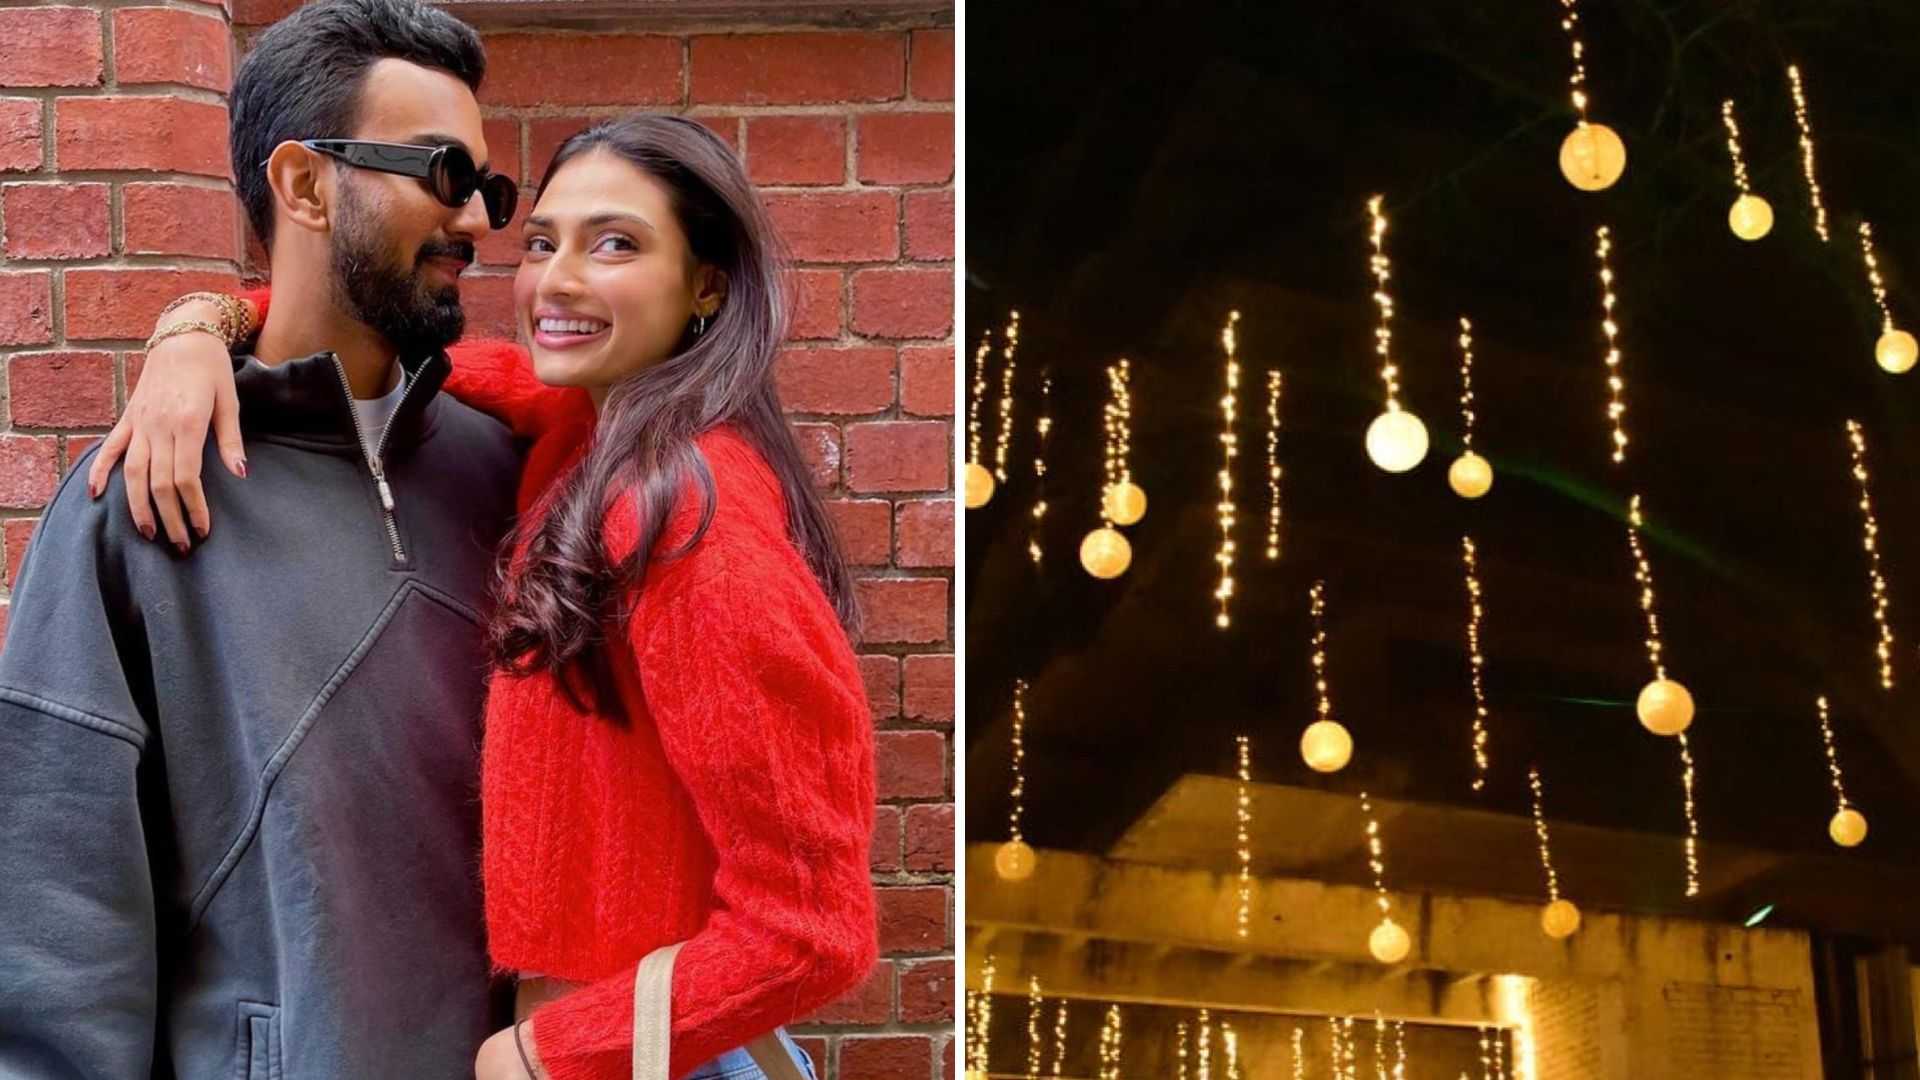 'Should have painted the house...': Athiya Shetty and KL Rahul's wedding preparations begin as his residence is all decked up, netizens react